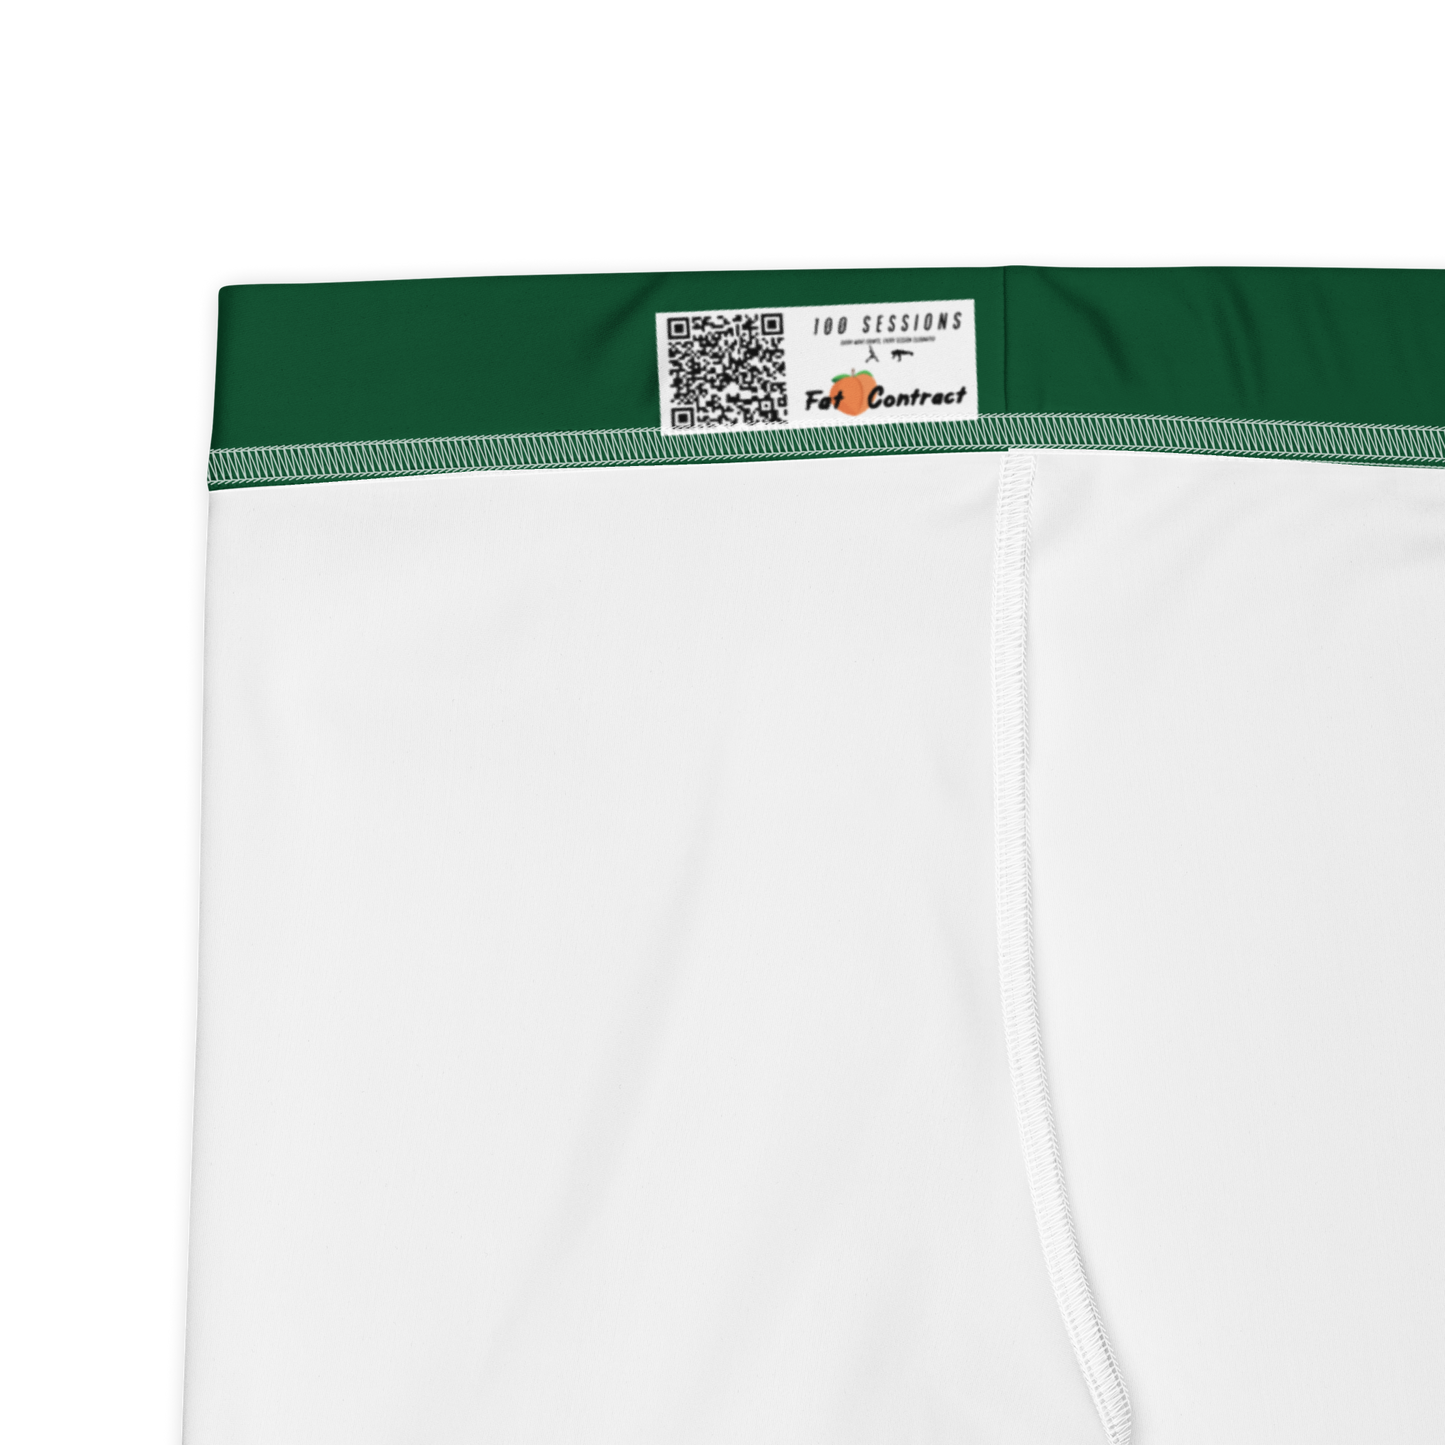 Shorts- Green Fat Booty Contract